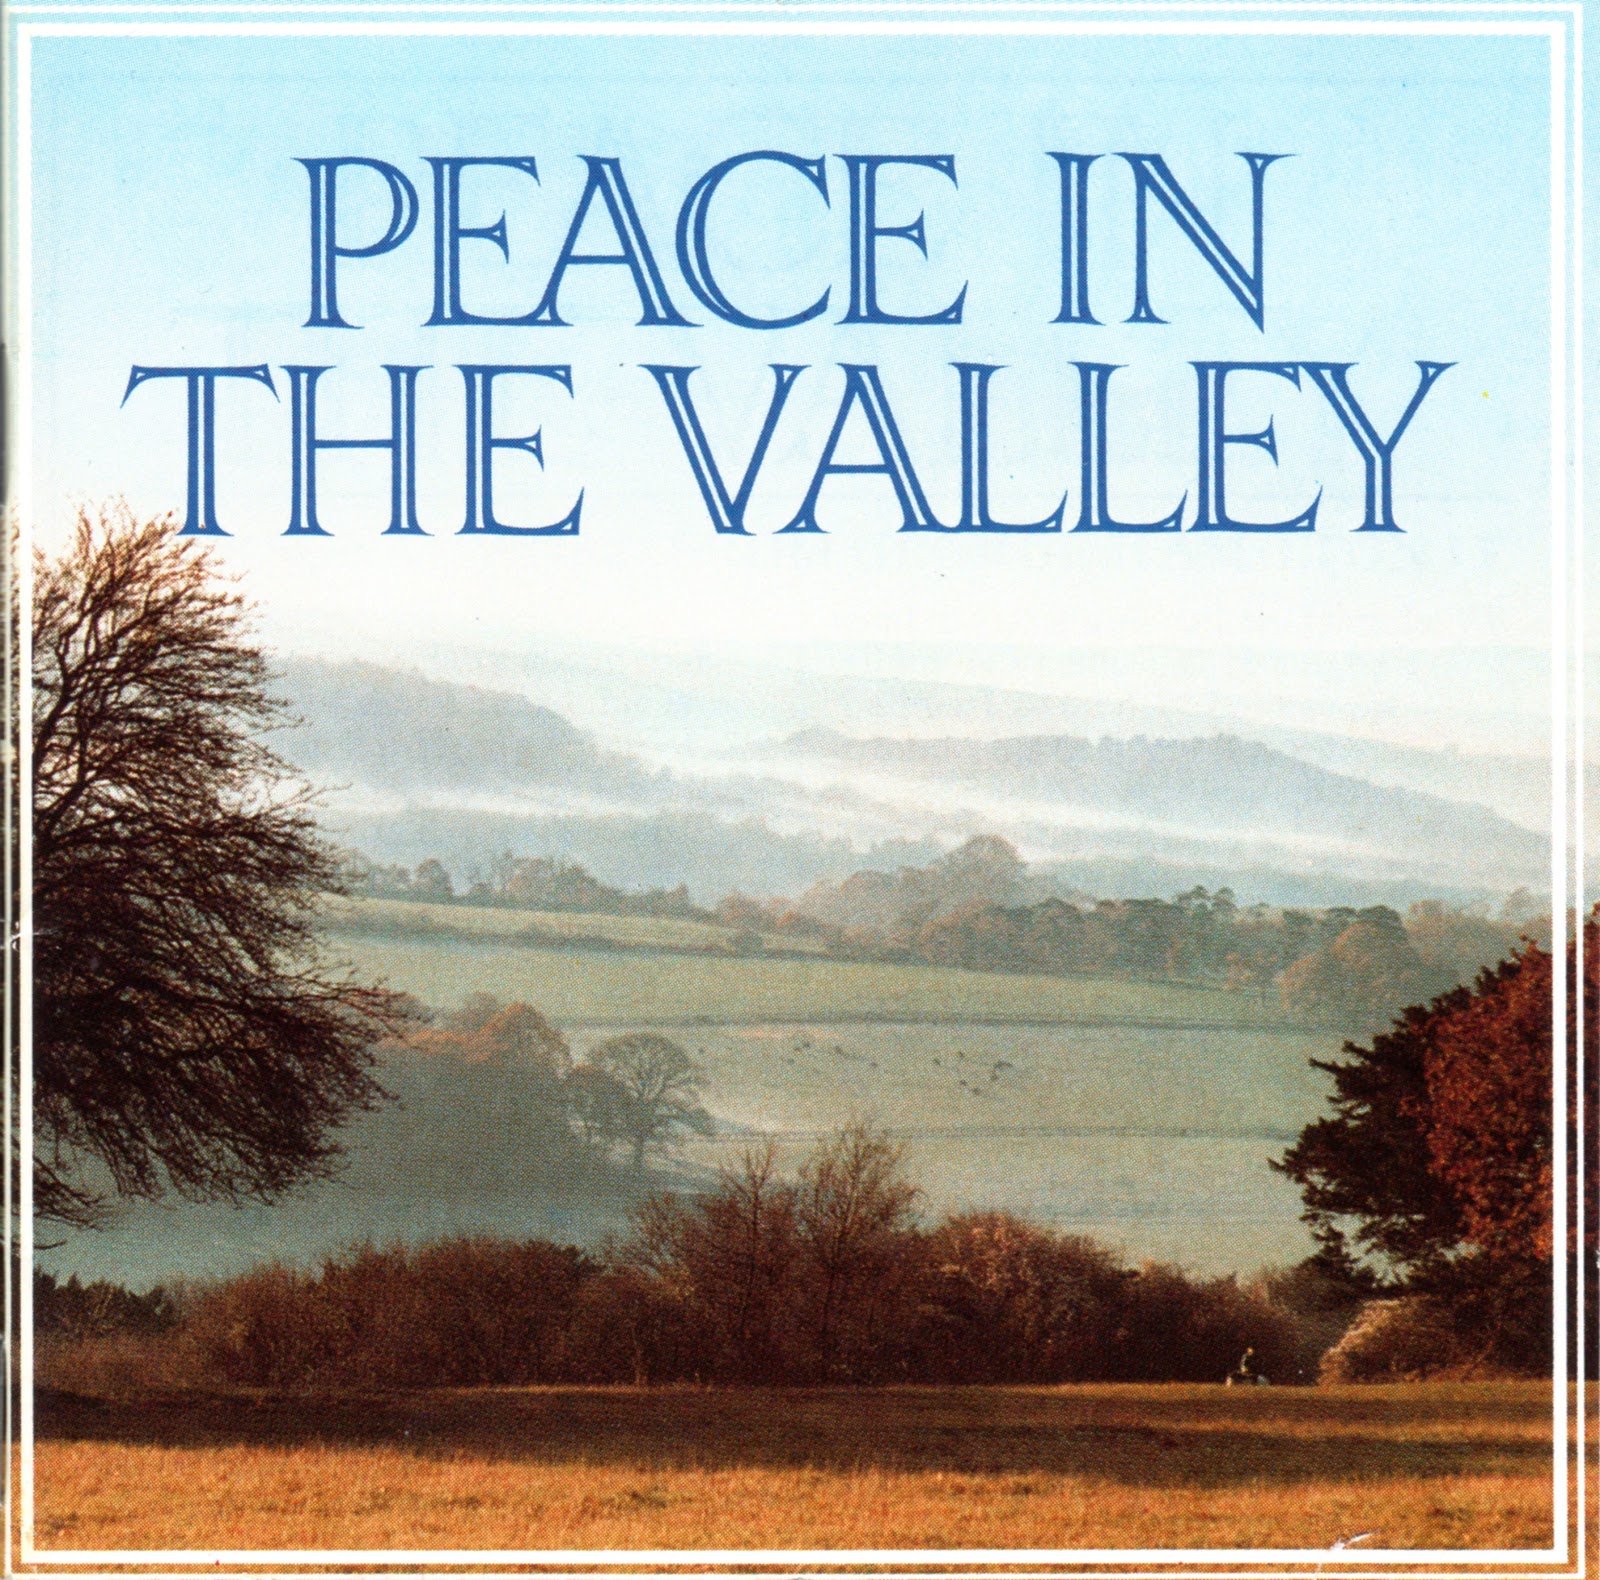 Peace in the valley tennessee ernie ford download #5